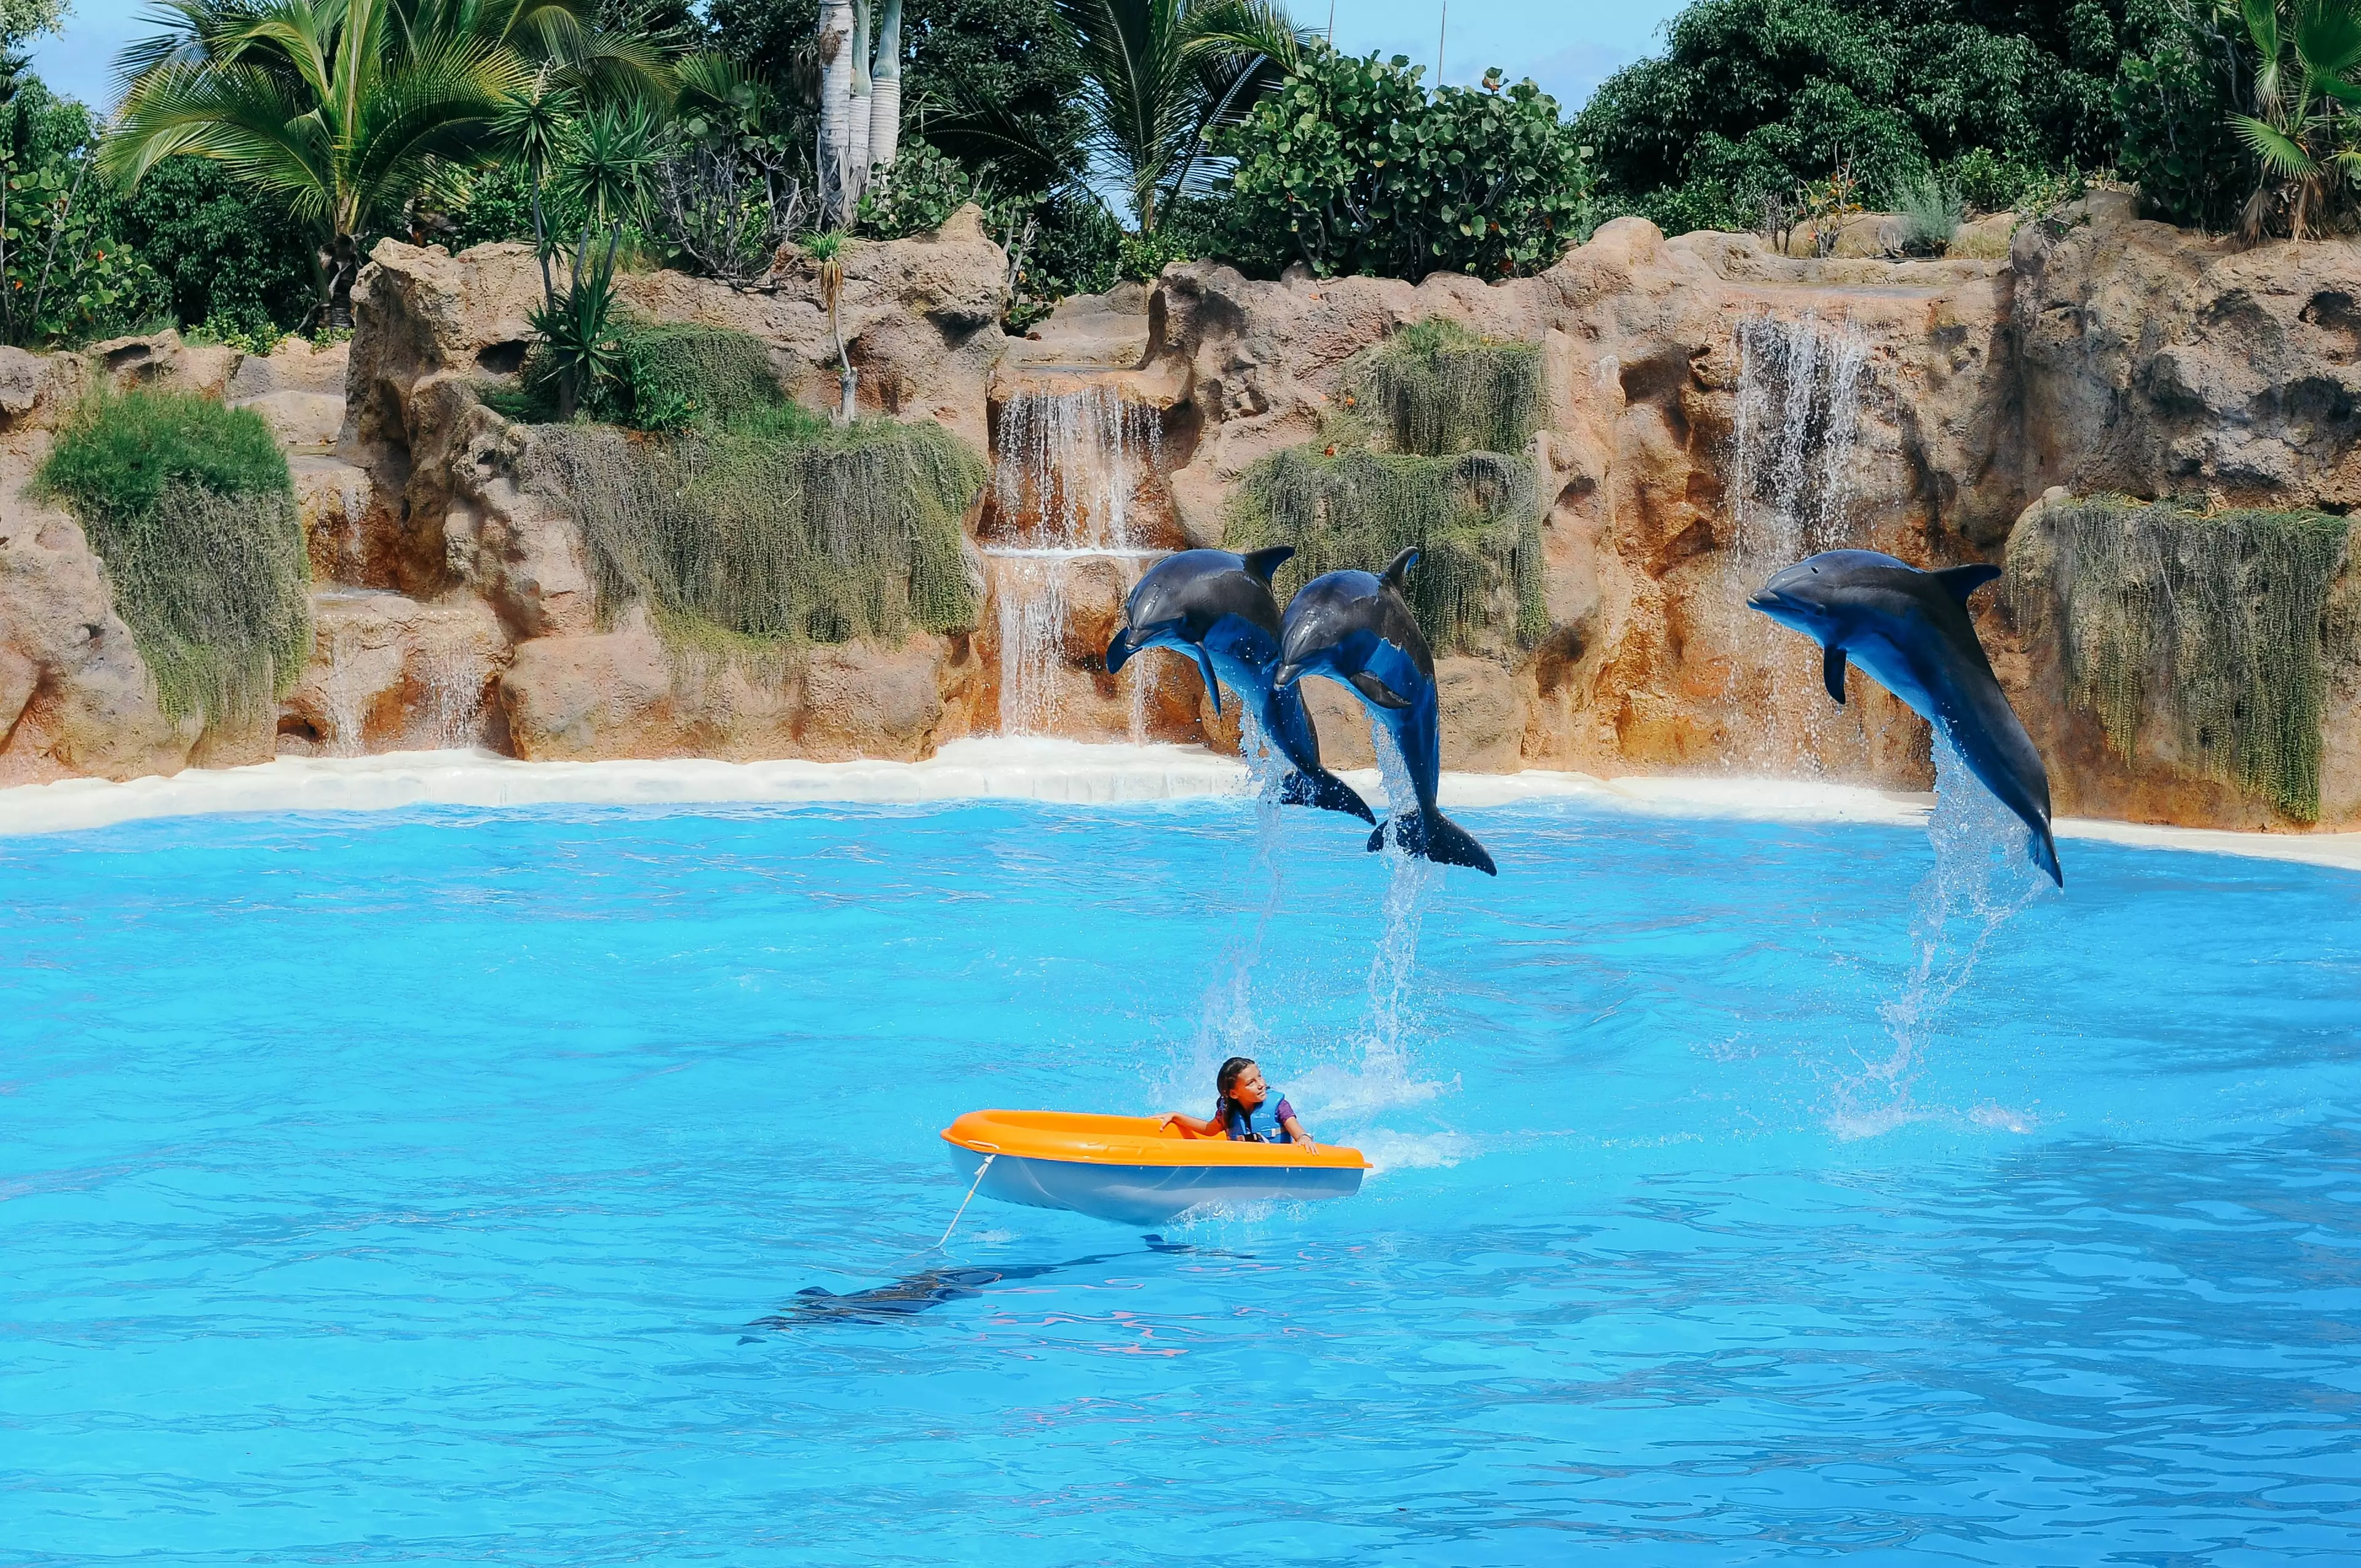 The new laws will ban dolphin shows (